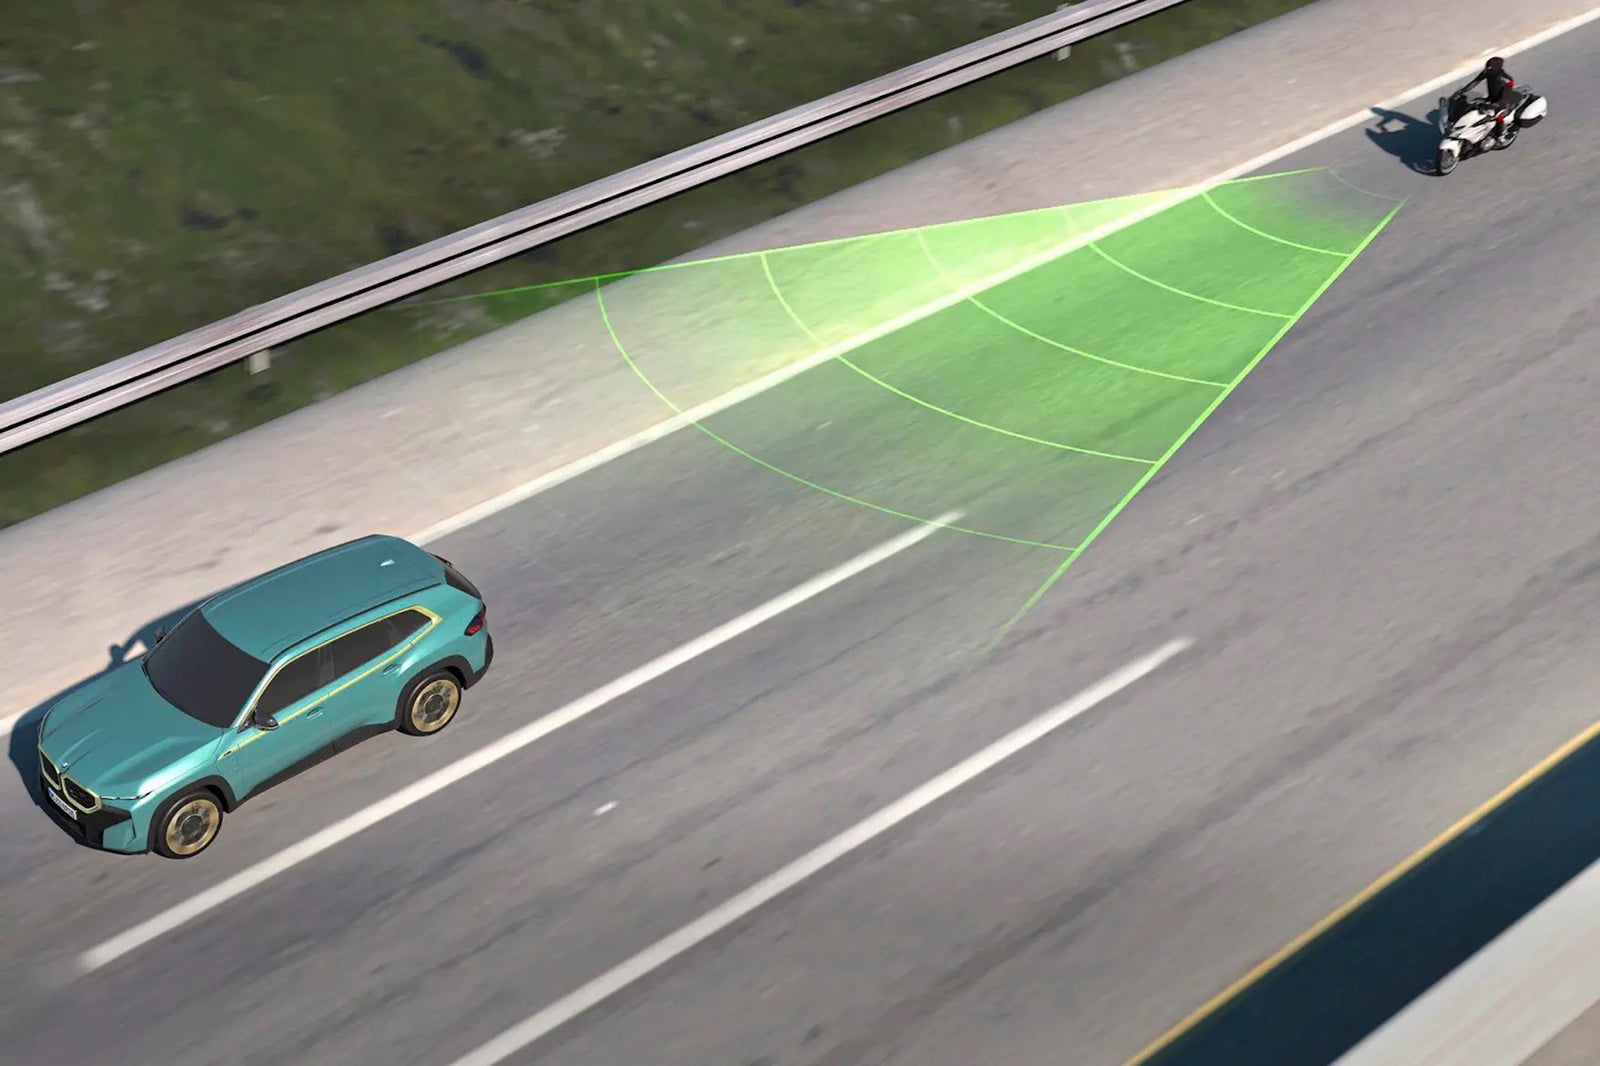 BMW's Front Collision Warning System: Radar-Based Safety Alerts and Intelligent Response